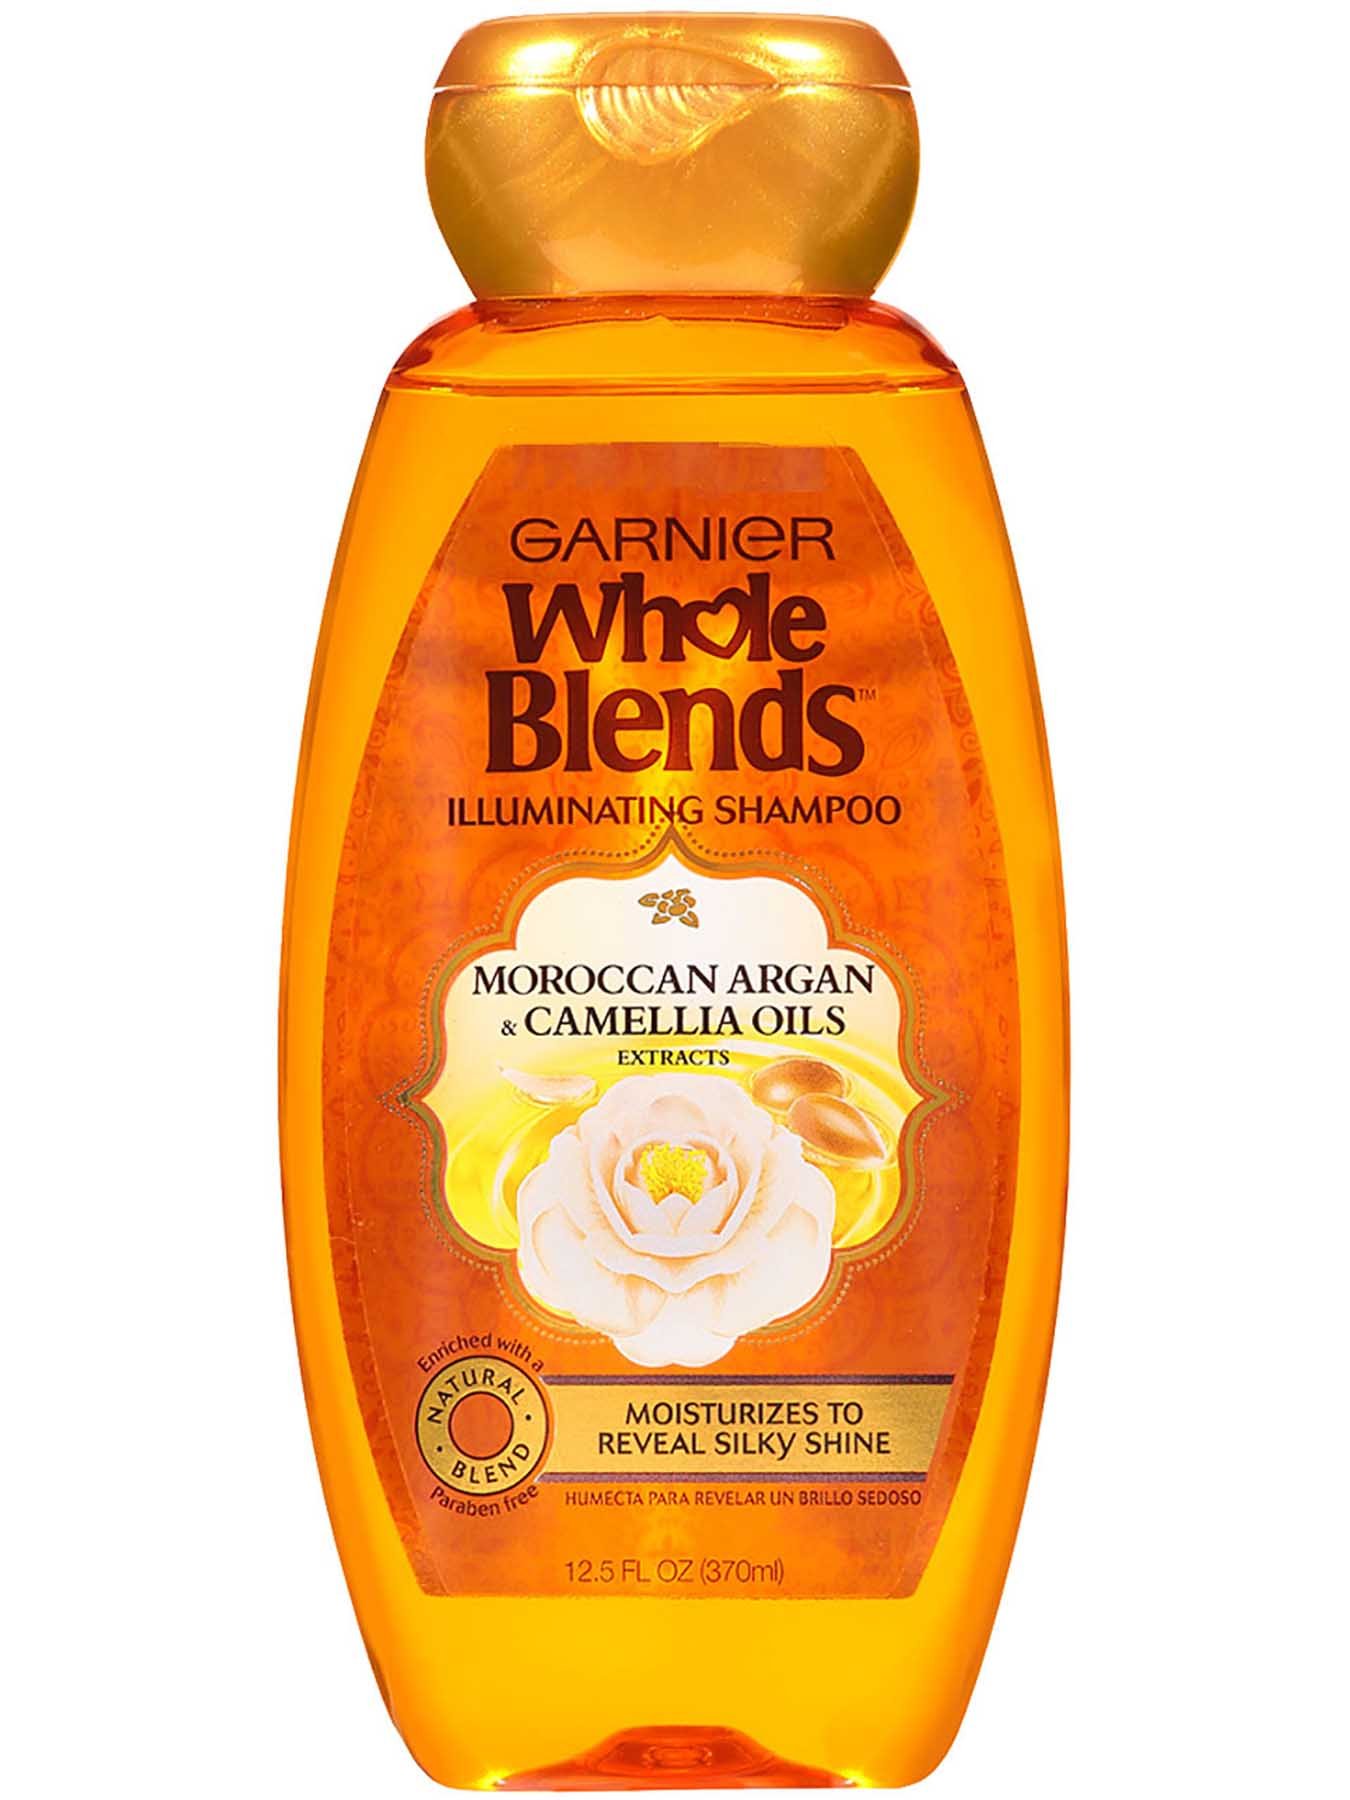 Front view of Illuminating Shampoo with Moroccan, Argan, and Camellia Oils Extracts.